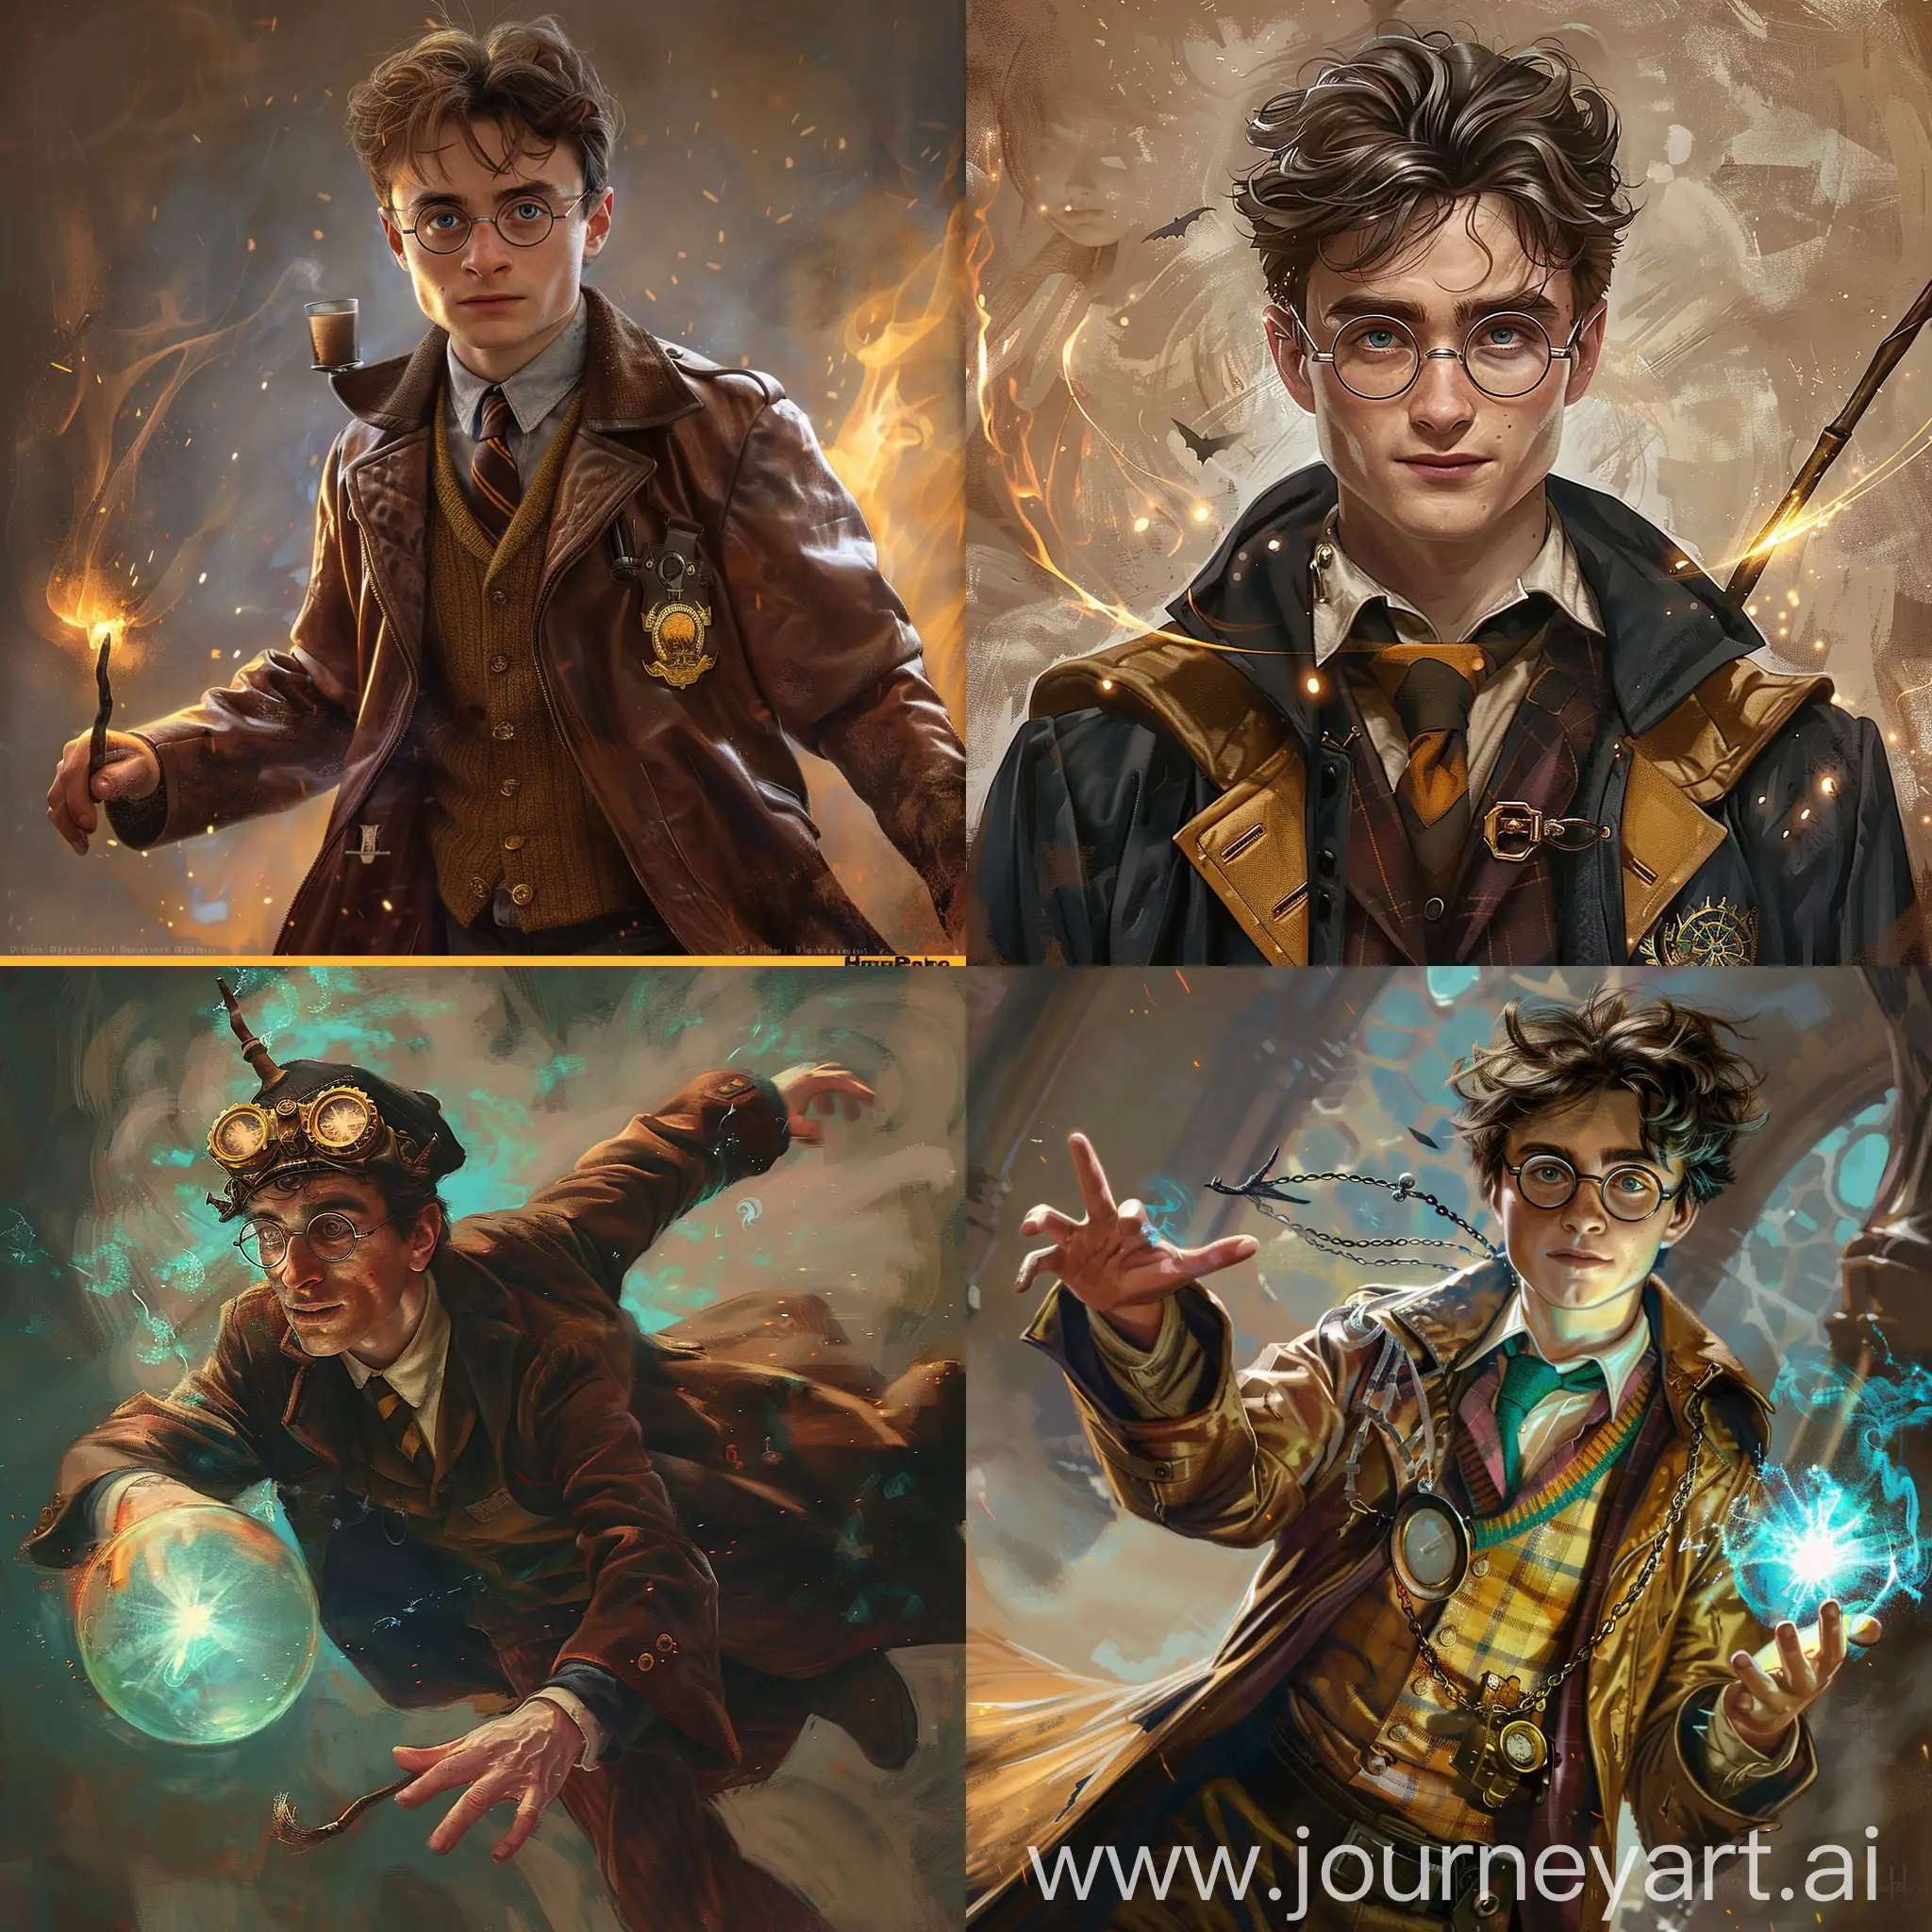 Harry potter, character, steampunk, quidditch, Harry potter, character, patronus spell